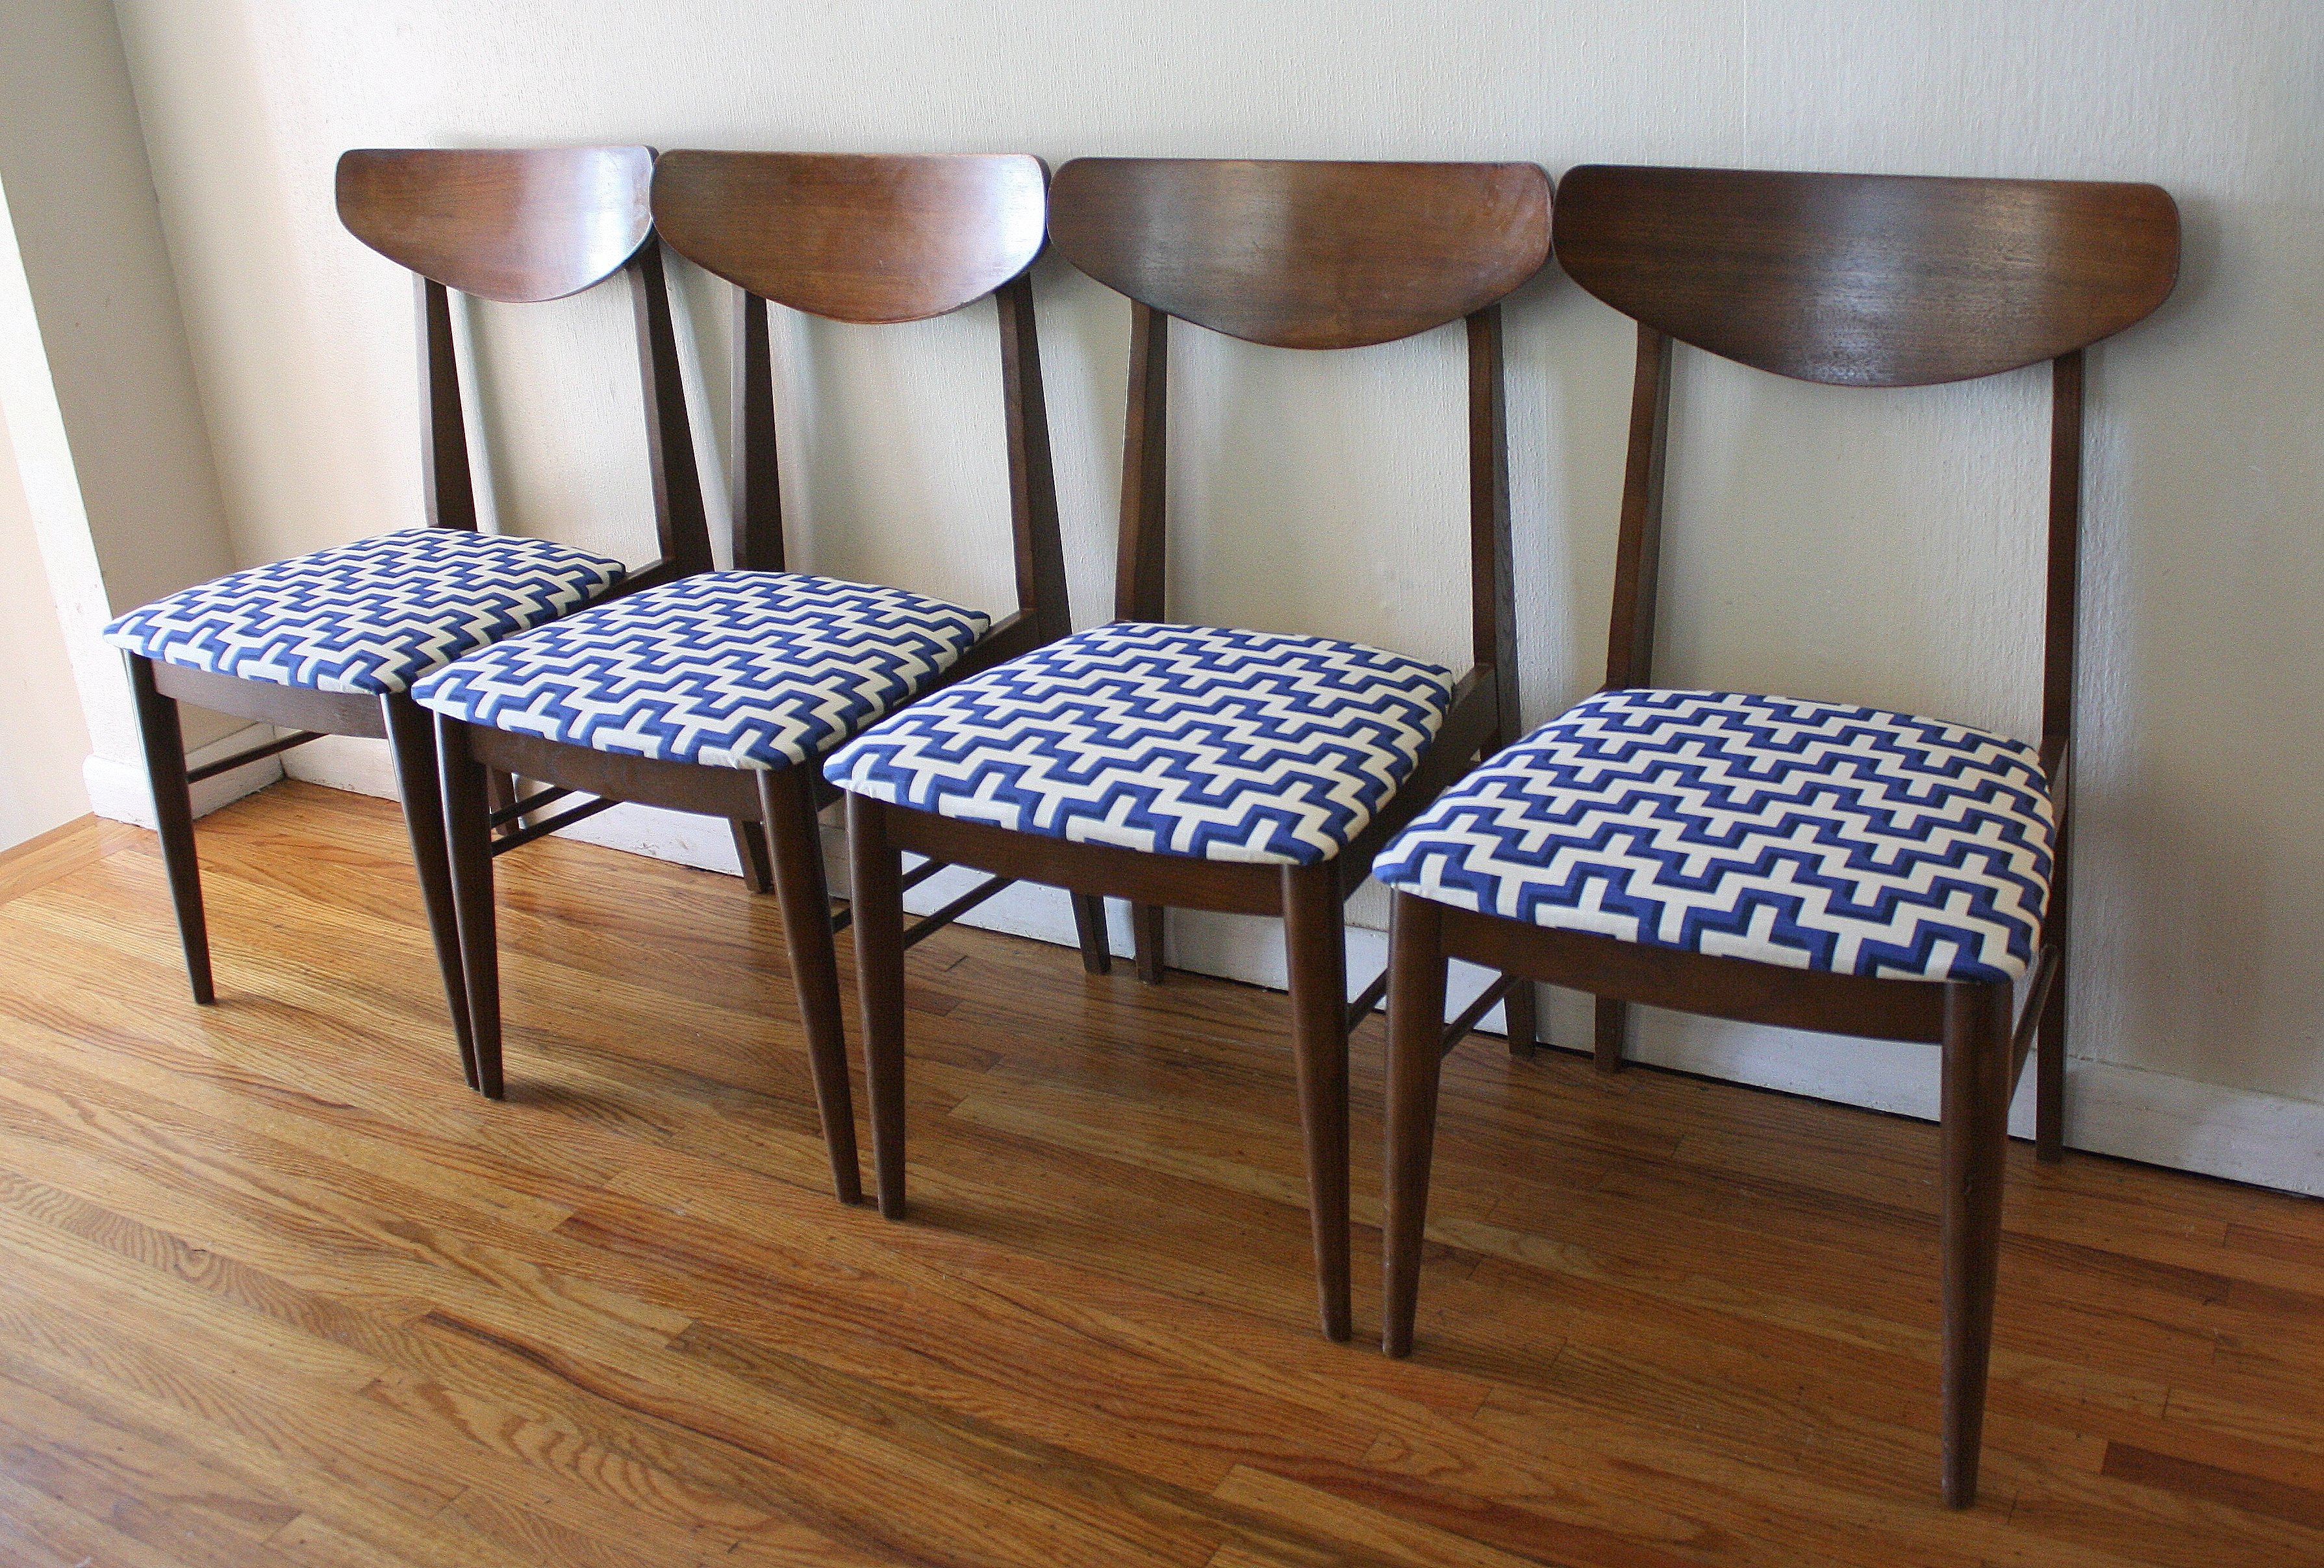 Fabric Ideas For Dining Room Chairs